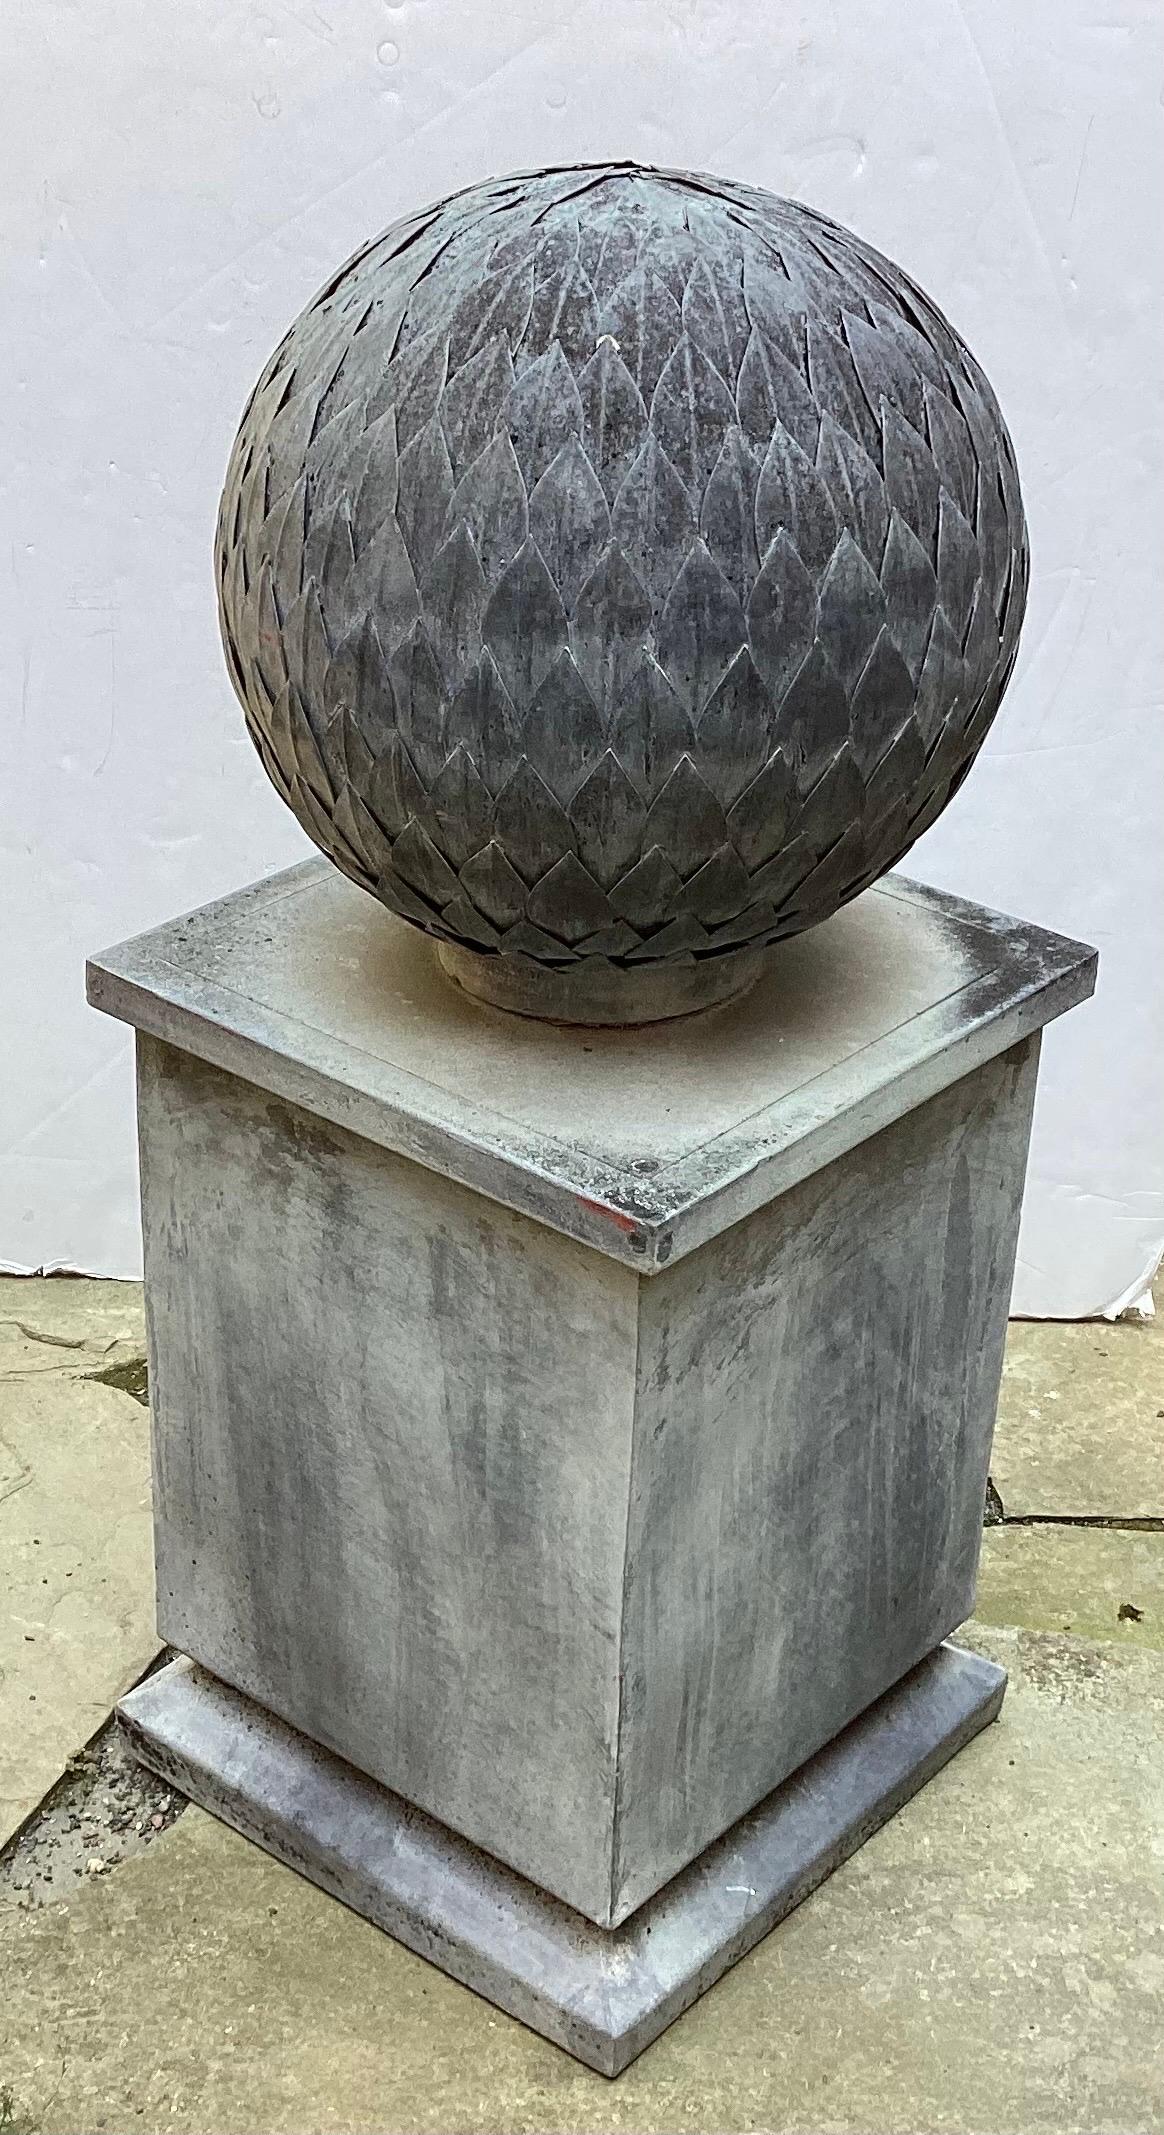 A hand made weather zinc garden sculpture of a sphere on a square plinth base.  The sphere is made of hundreds of leaf shape parts attached to a square base.  40 inches tall, Circa 1970's